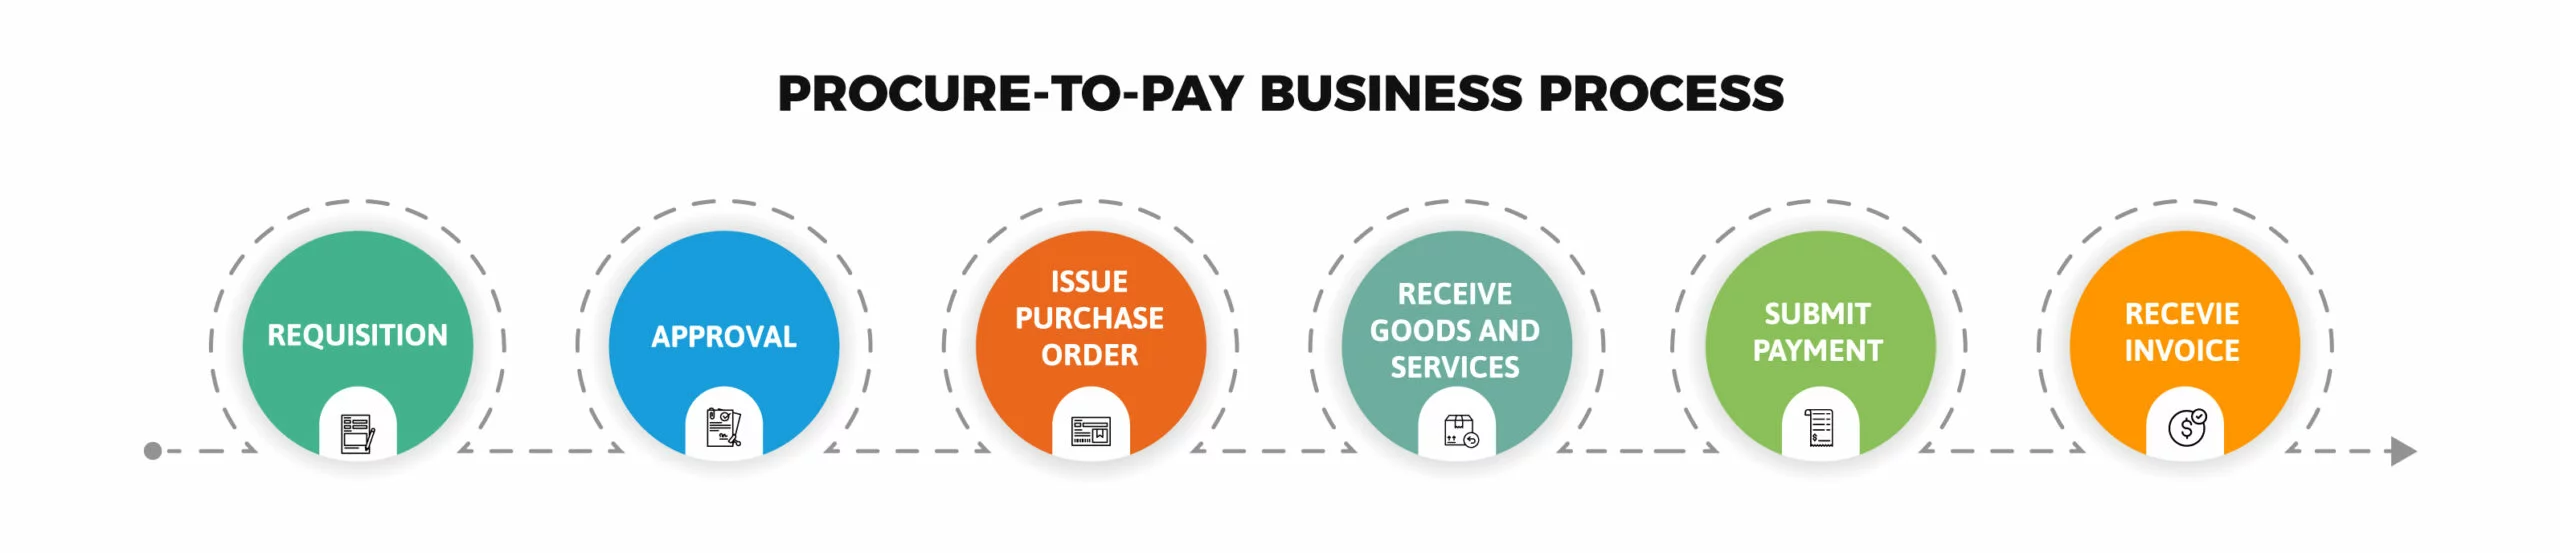 Procure to pay business process